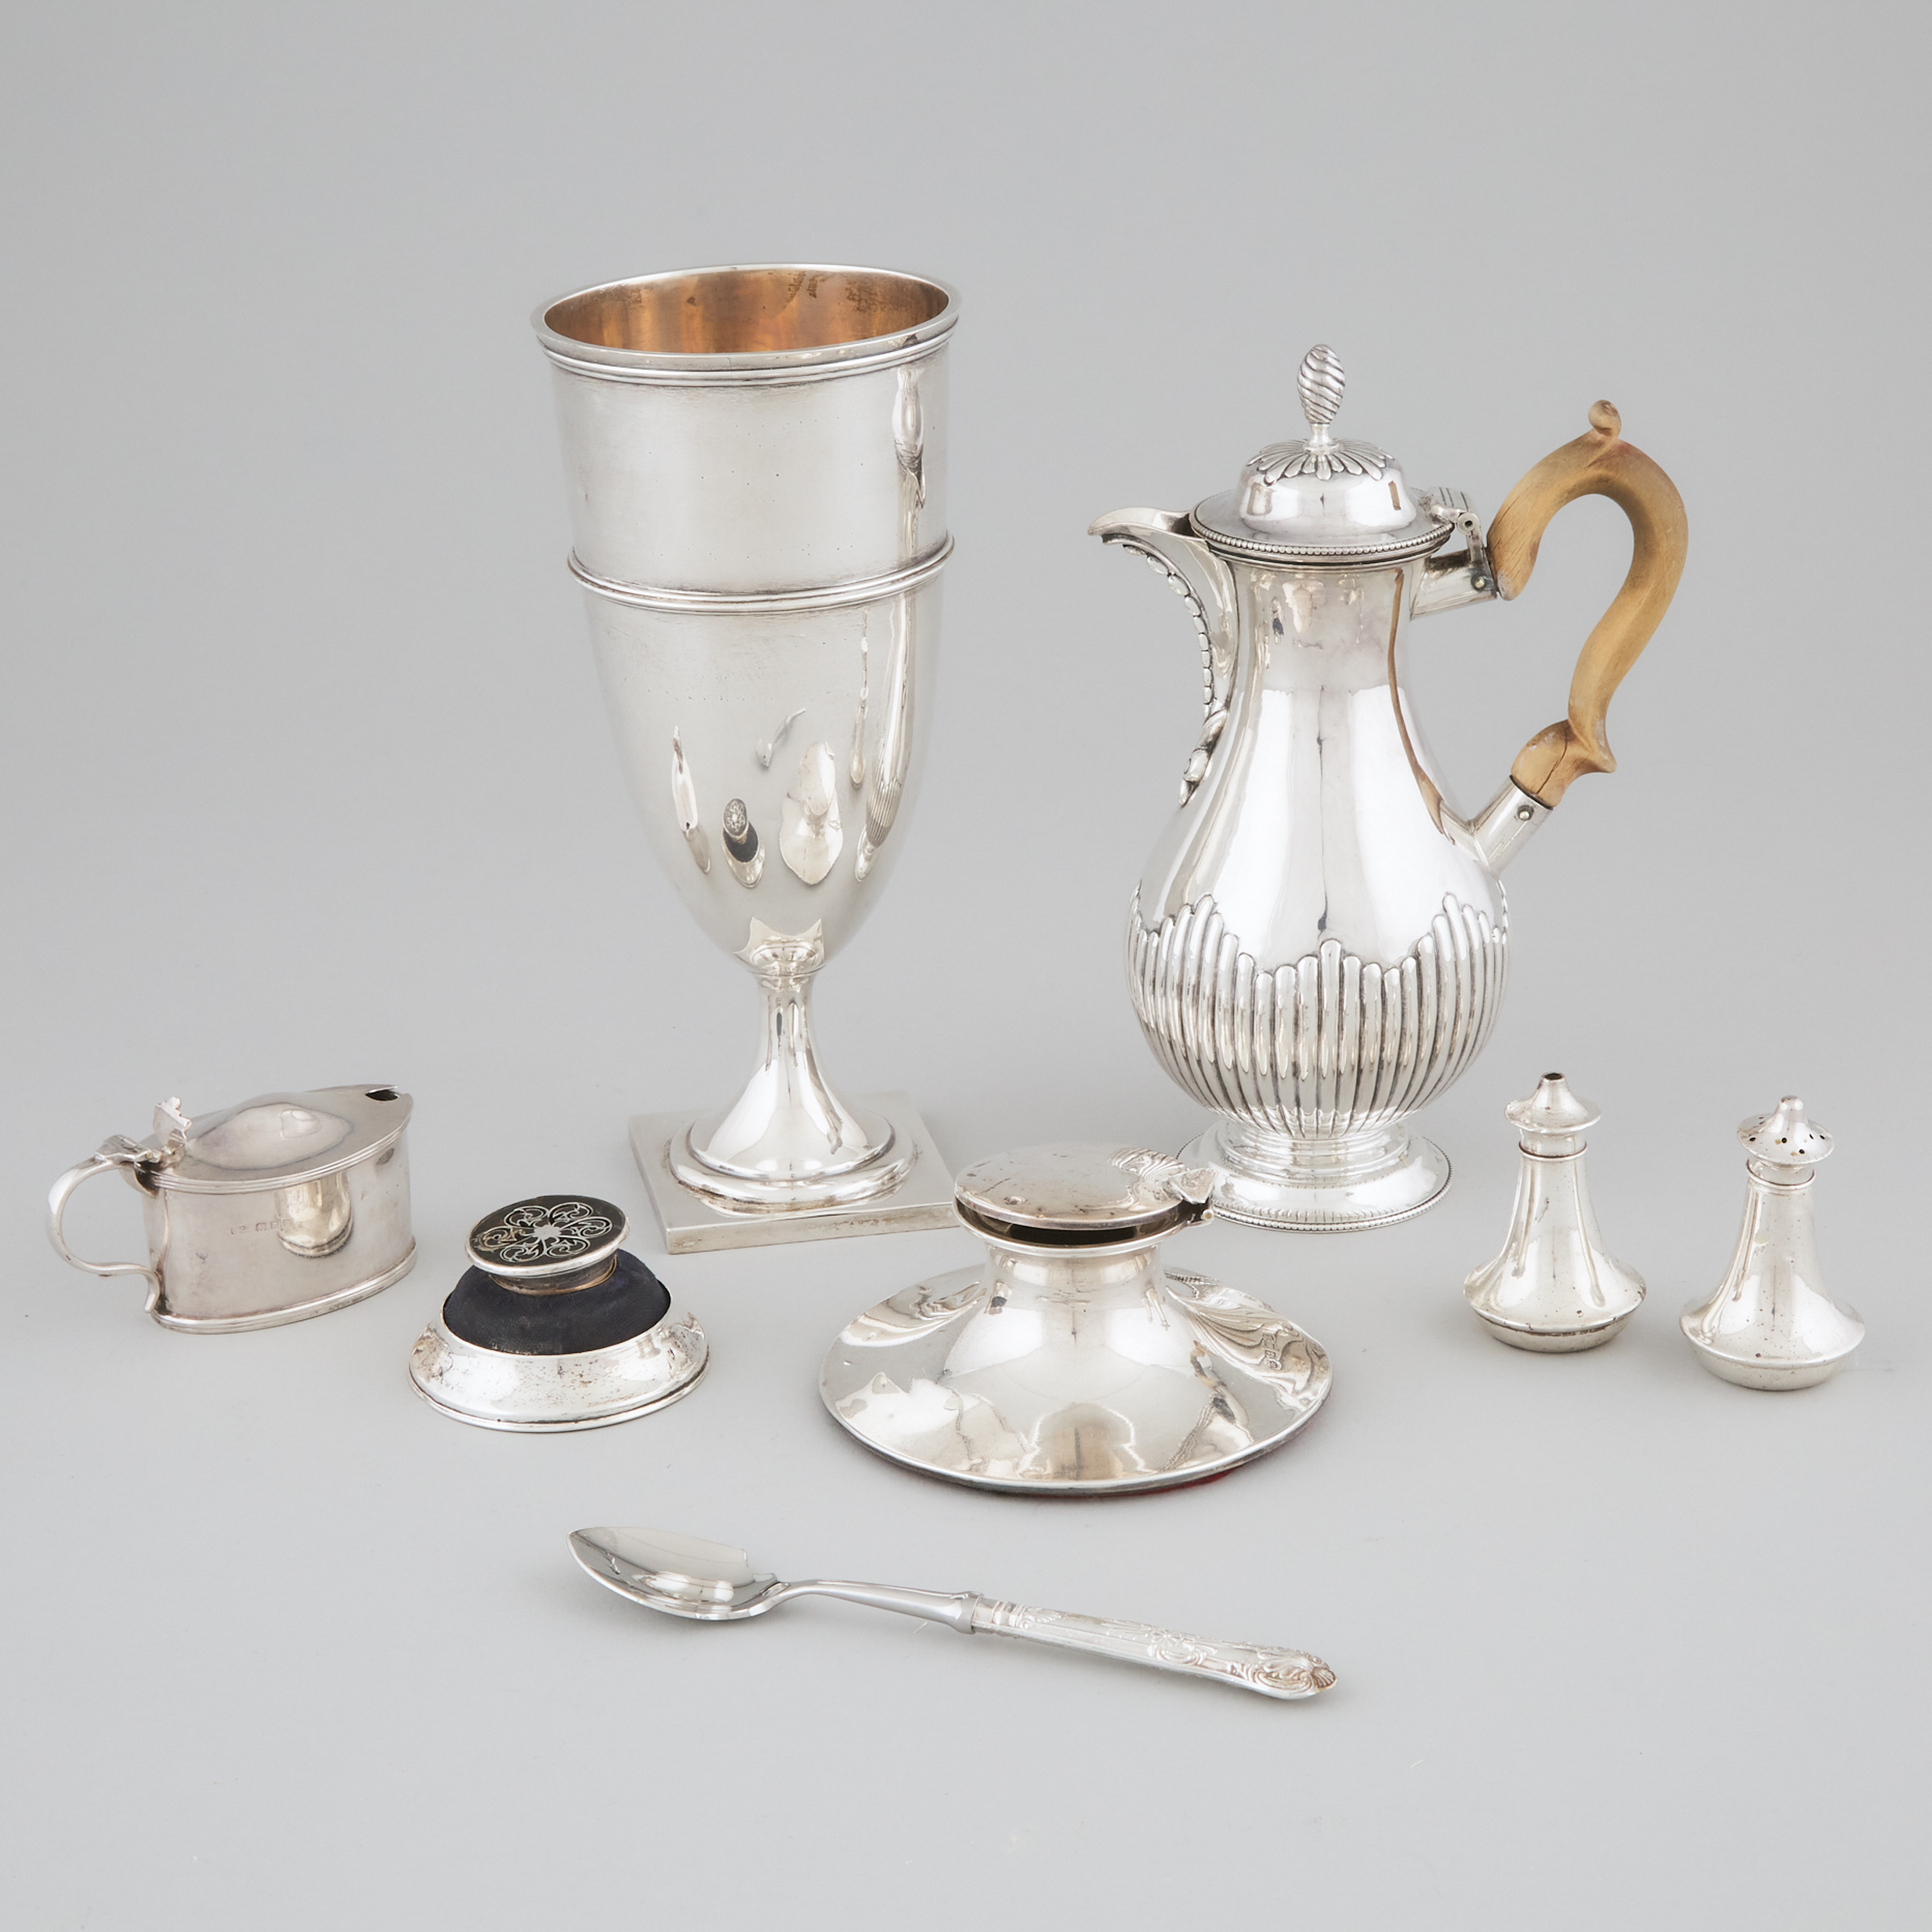 Group of Victorian and Later English Silver, late 19th/20th century